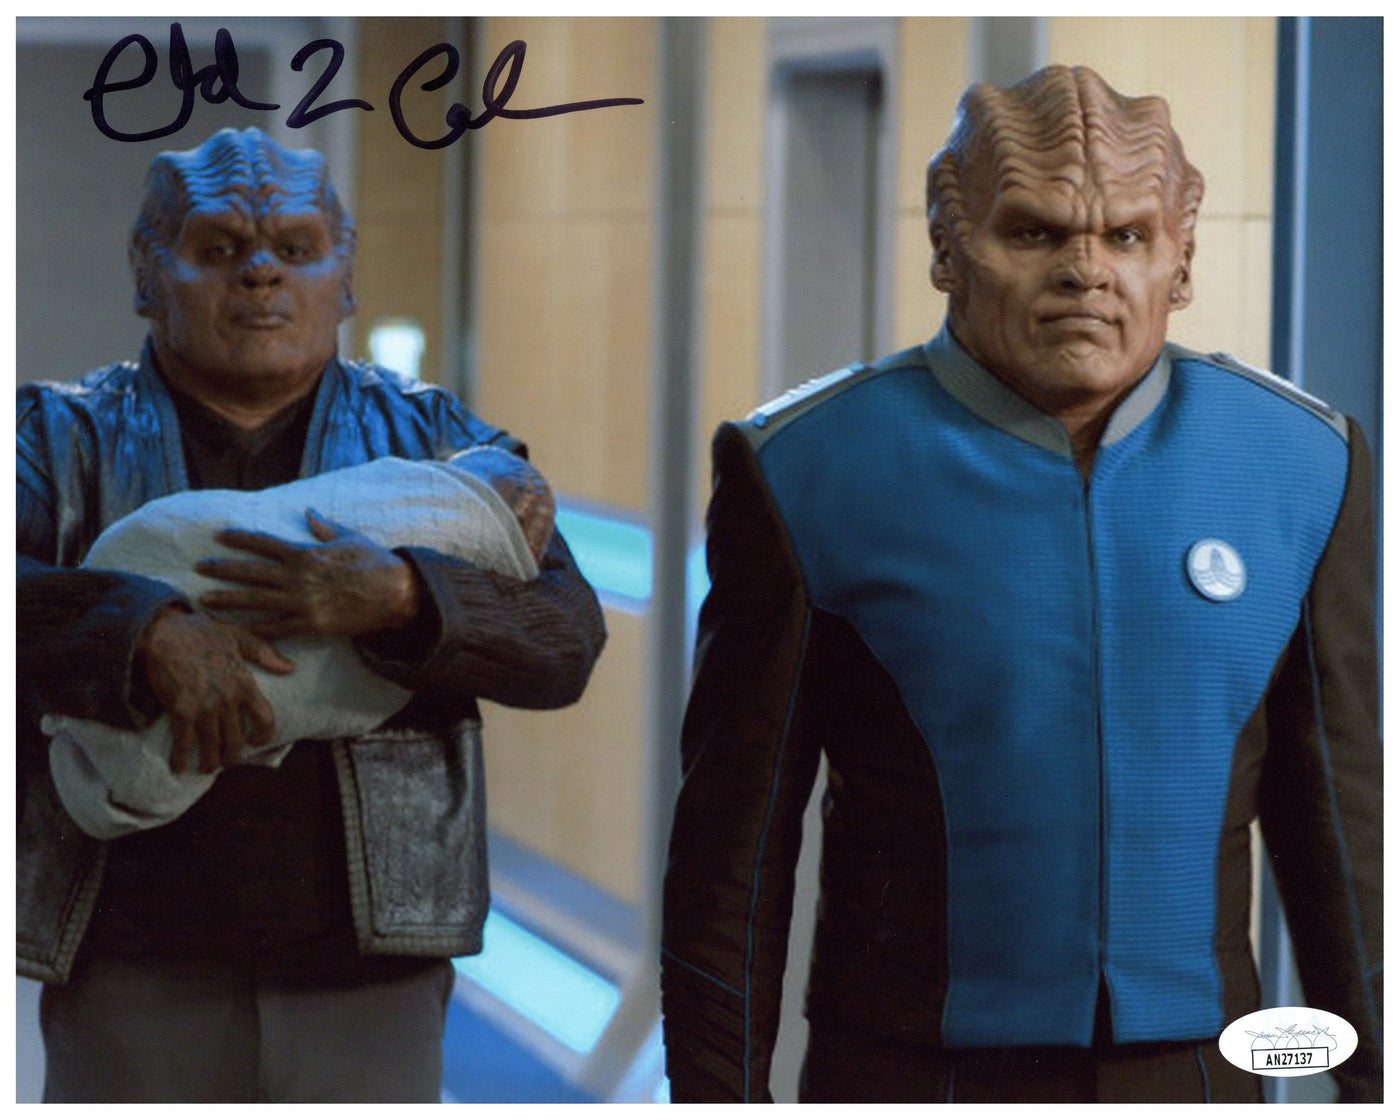 Chad Coleman Signed 8x10 Photo The Orville Klyden Autographed JSA COA